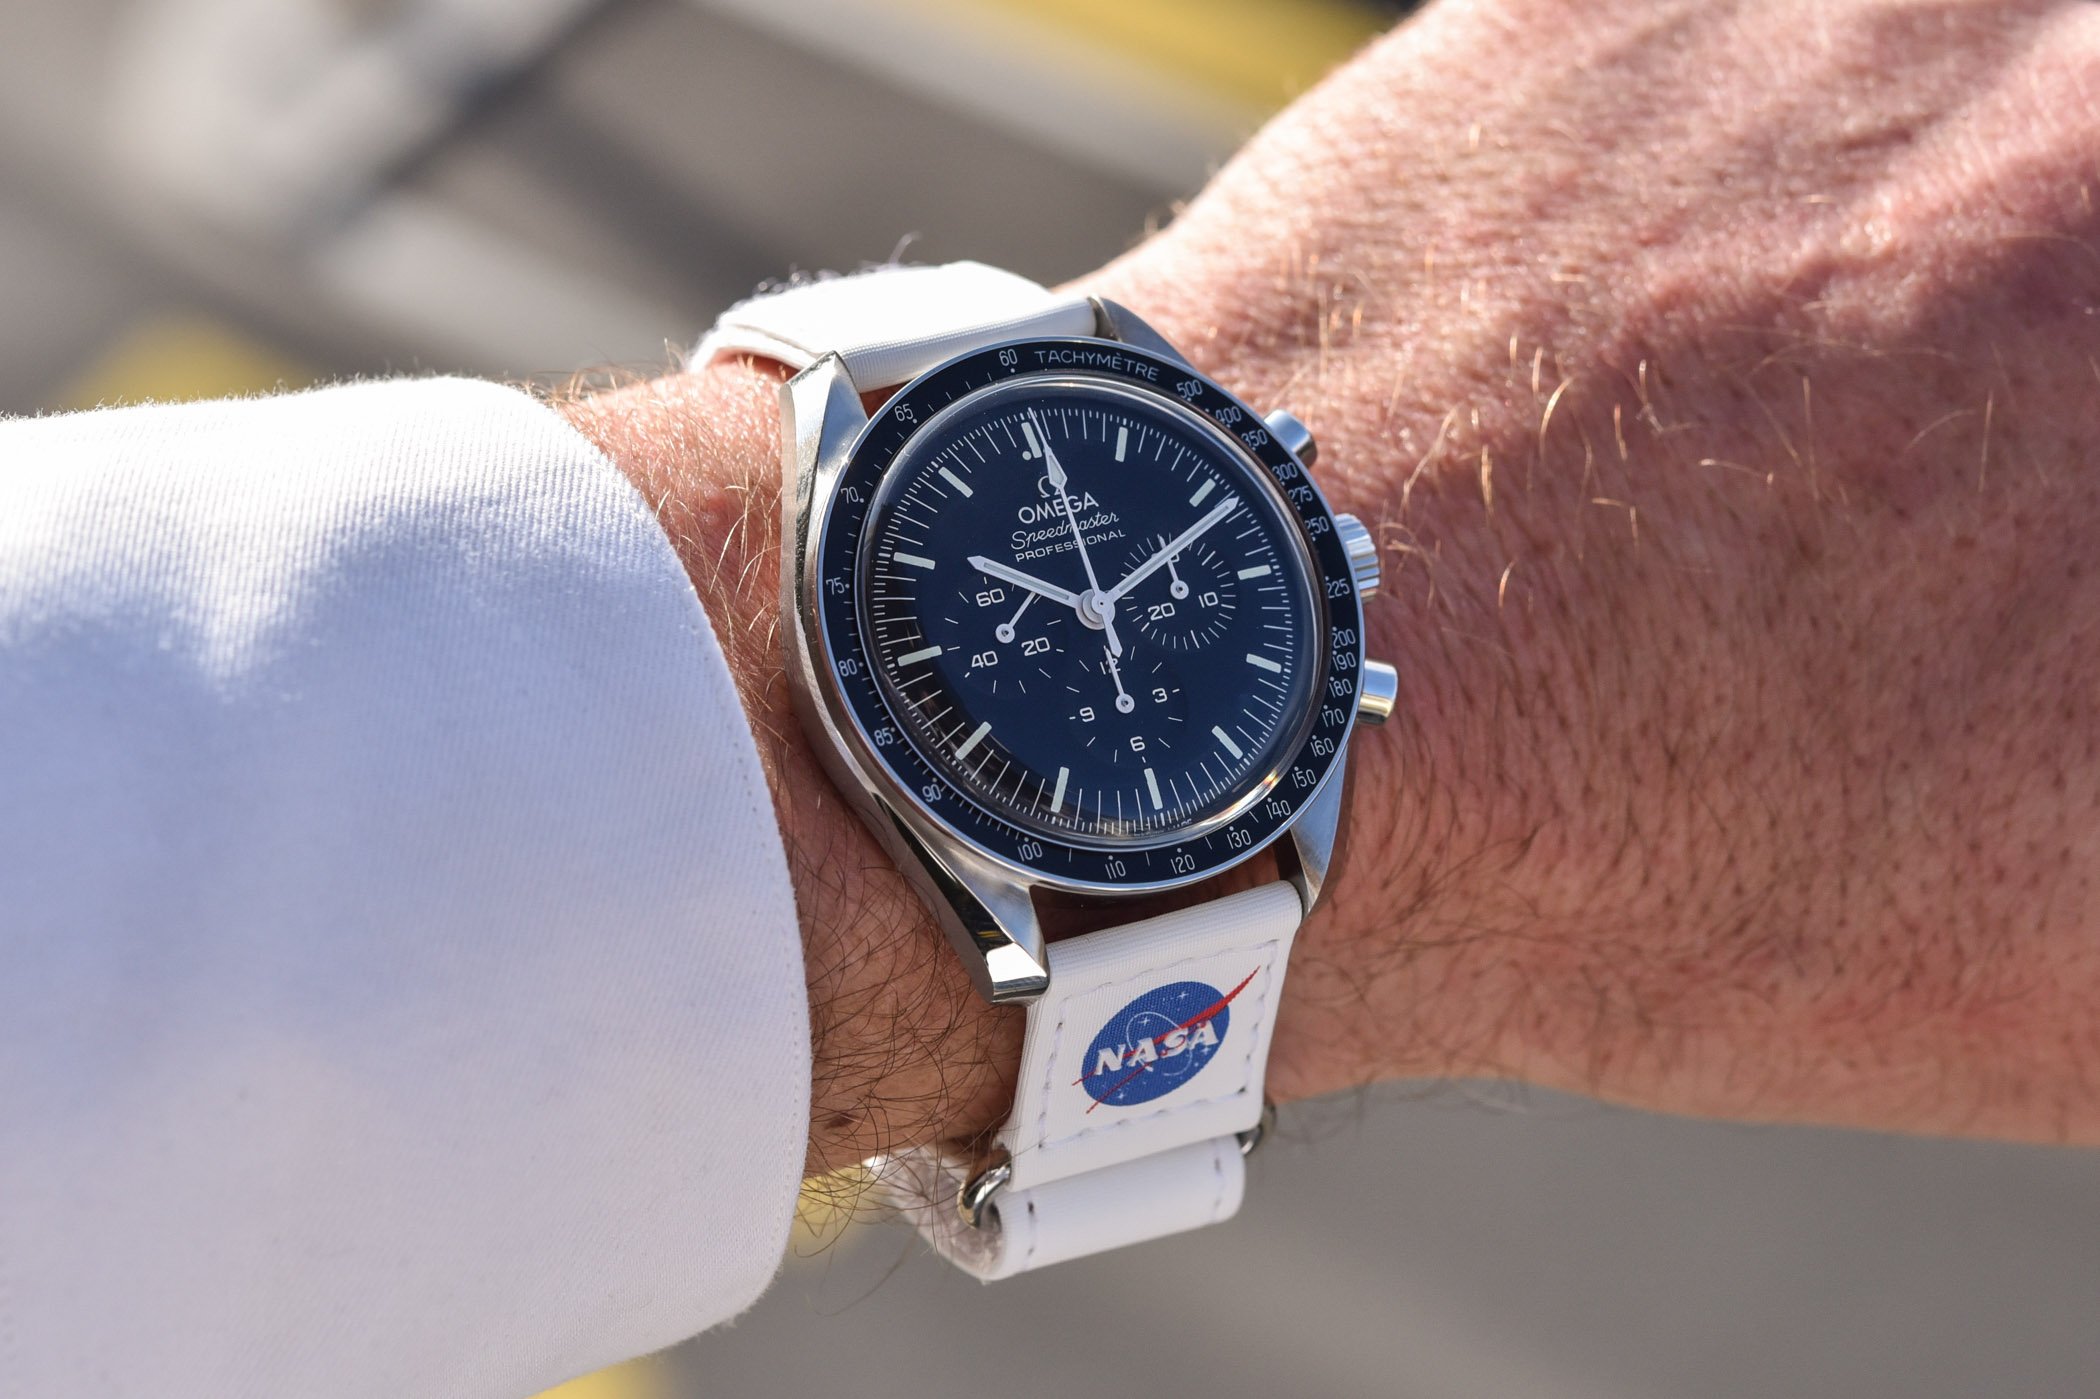 Introducing NASA Velcro Straps for the Omega Speedmaster Moonwatch